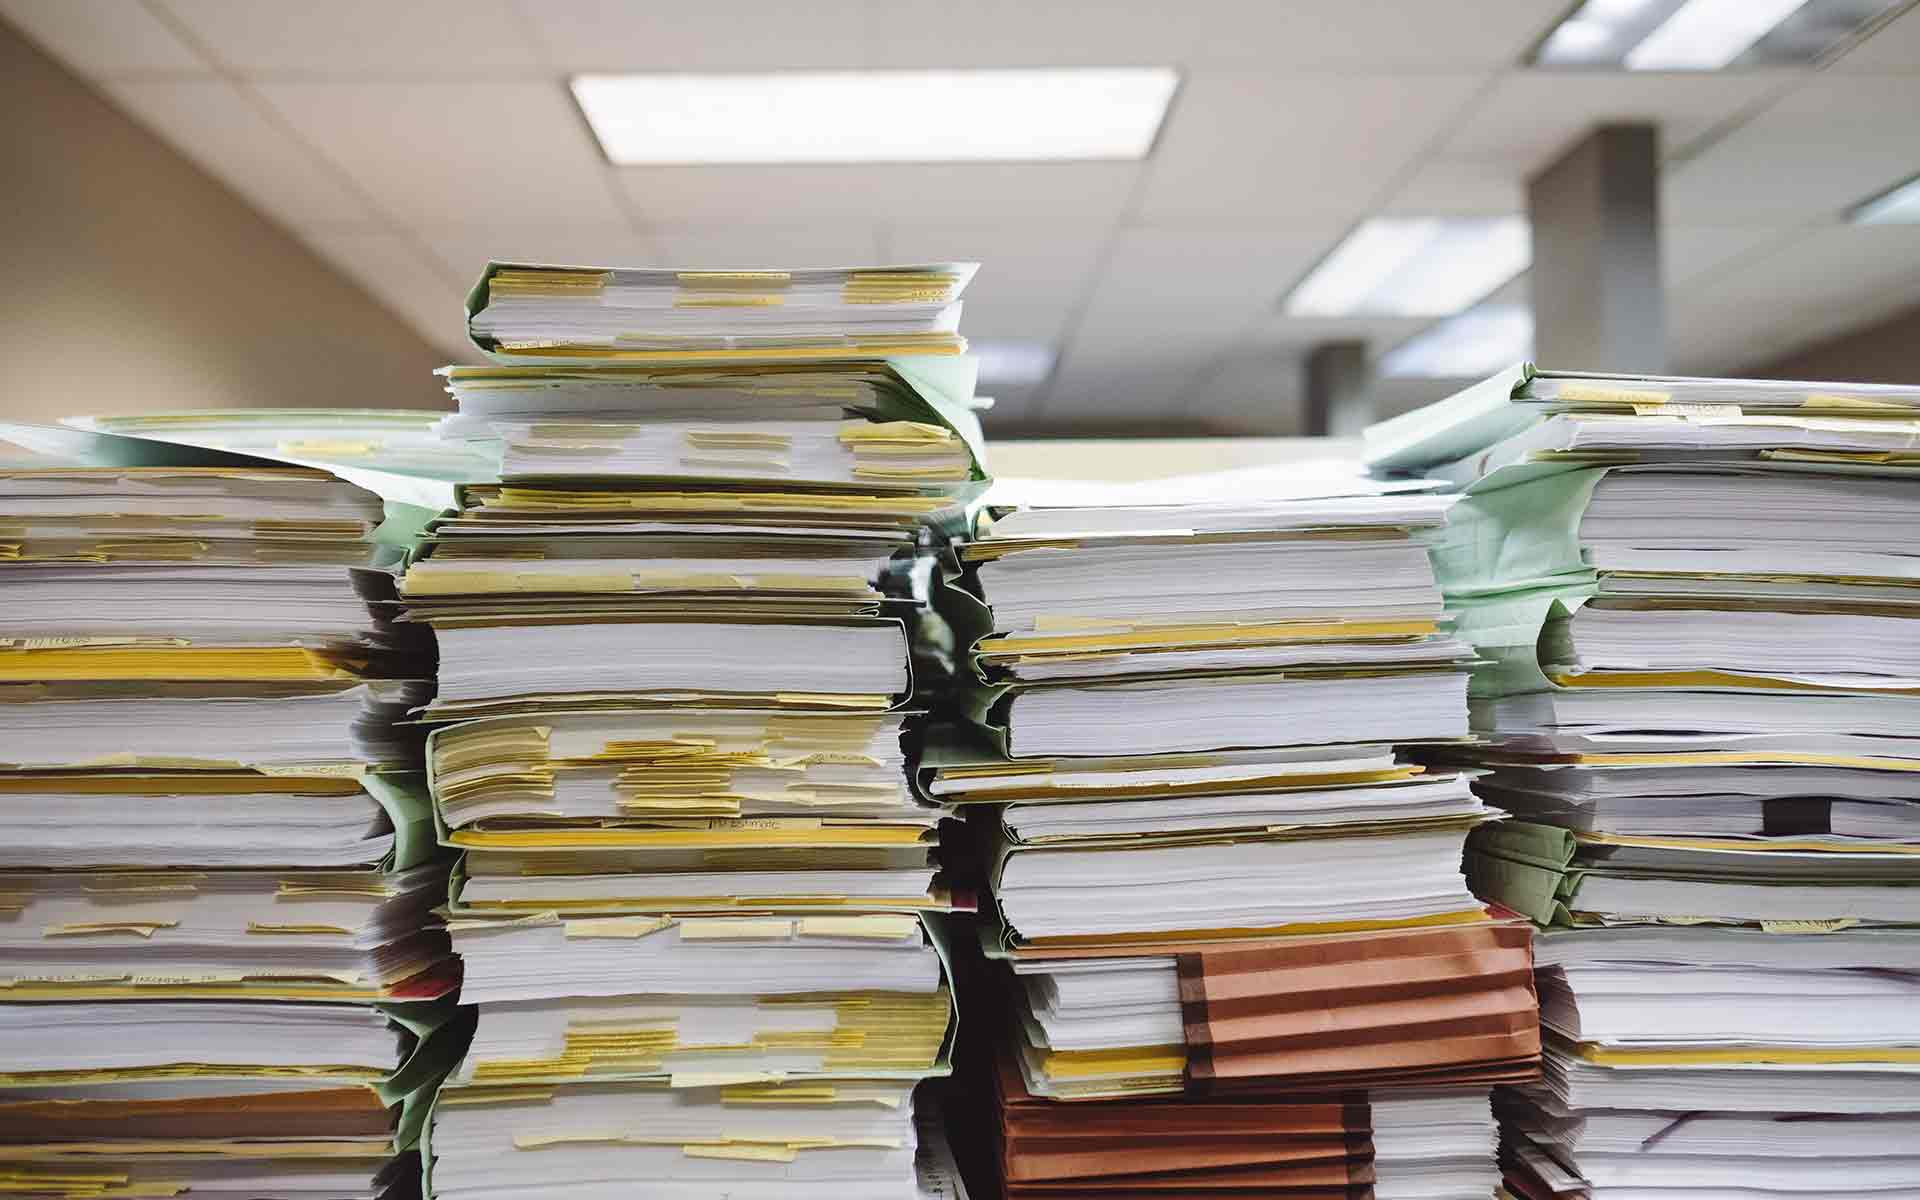 four large stacks of files and paper in an office